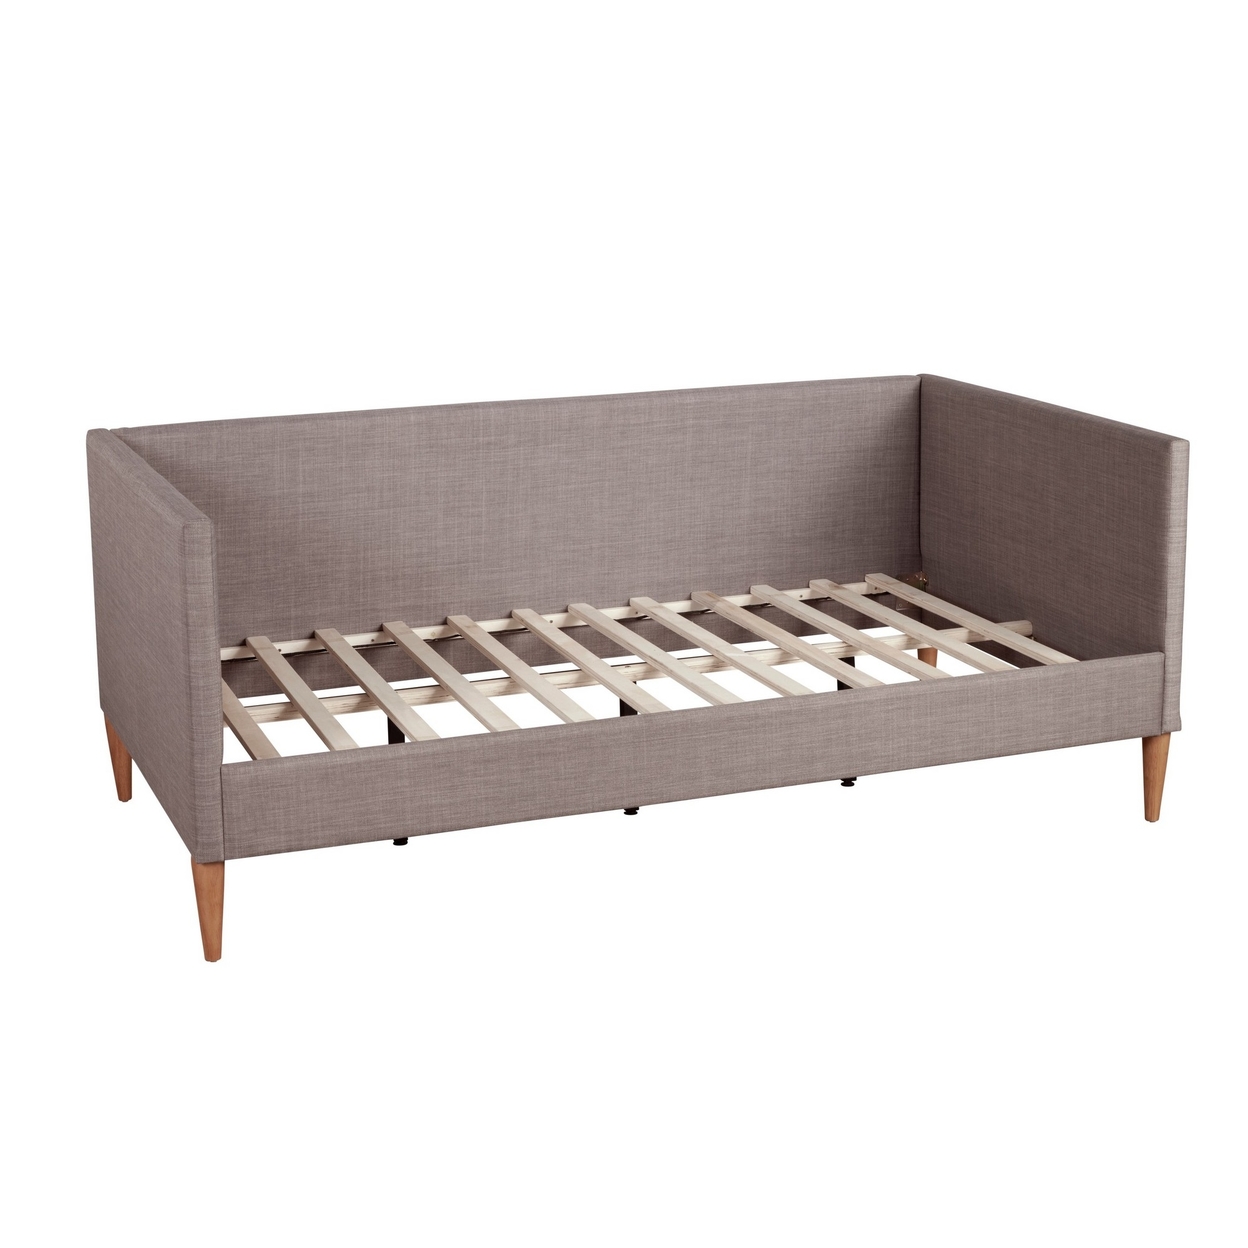 Daybed With Wooden Frame And Fabric Upholstery, Dark Gray- Saltoro Sherpi